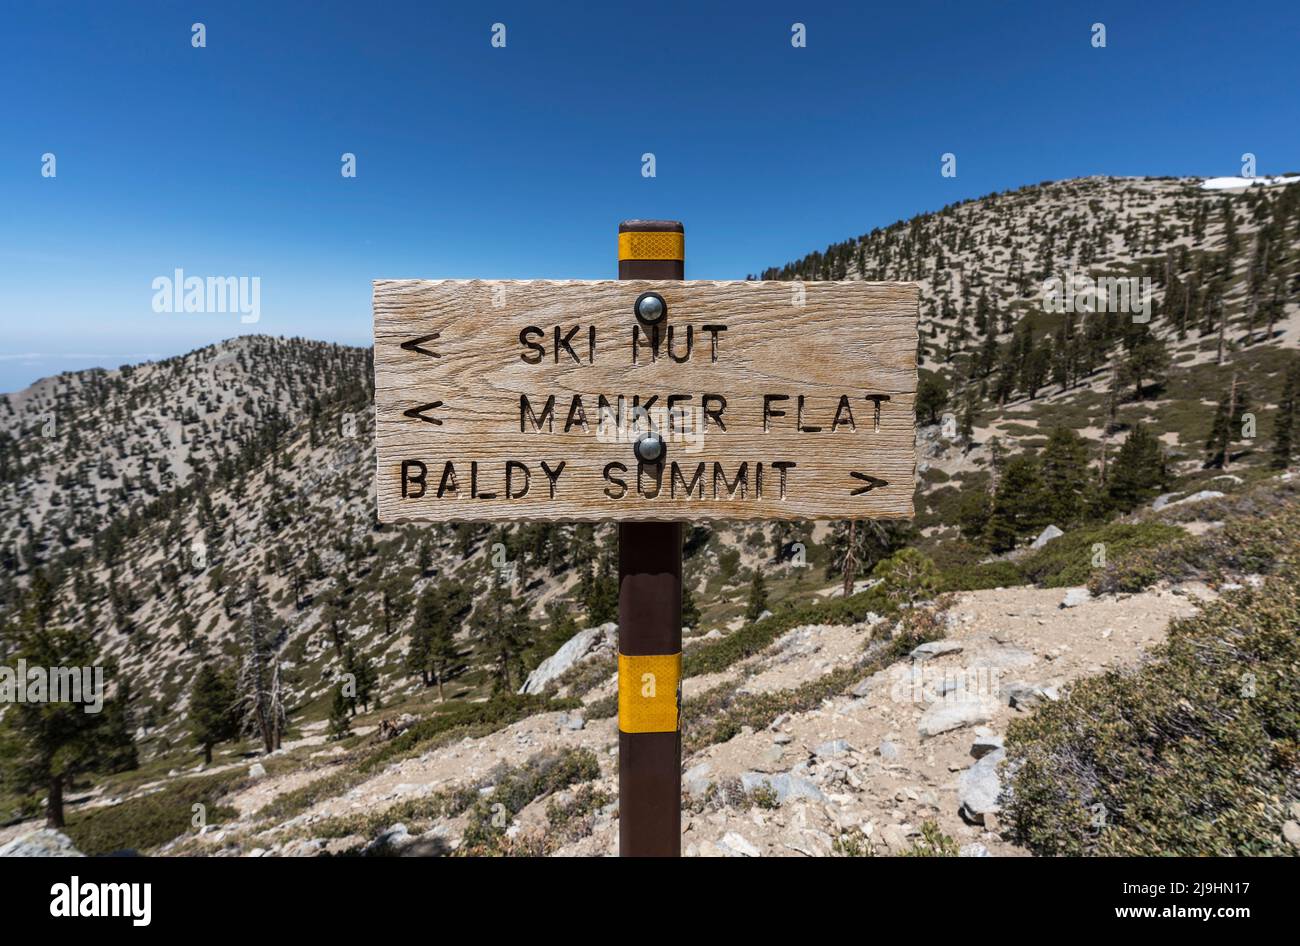 Mt Baldy, Manker Flat trail sign in the San Gabriel Mountains near Los Angeles, California. Stock Photo